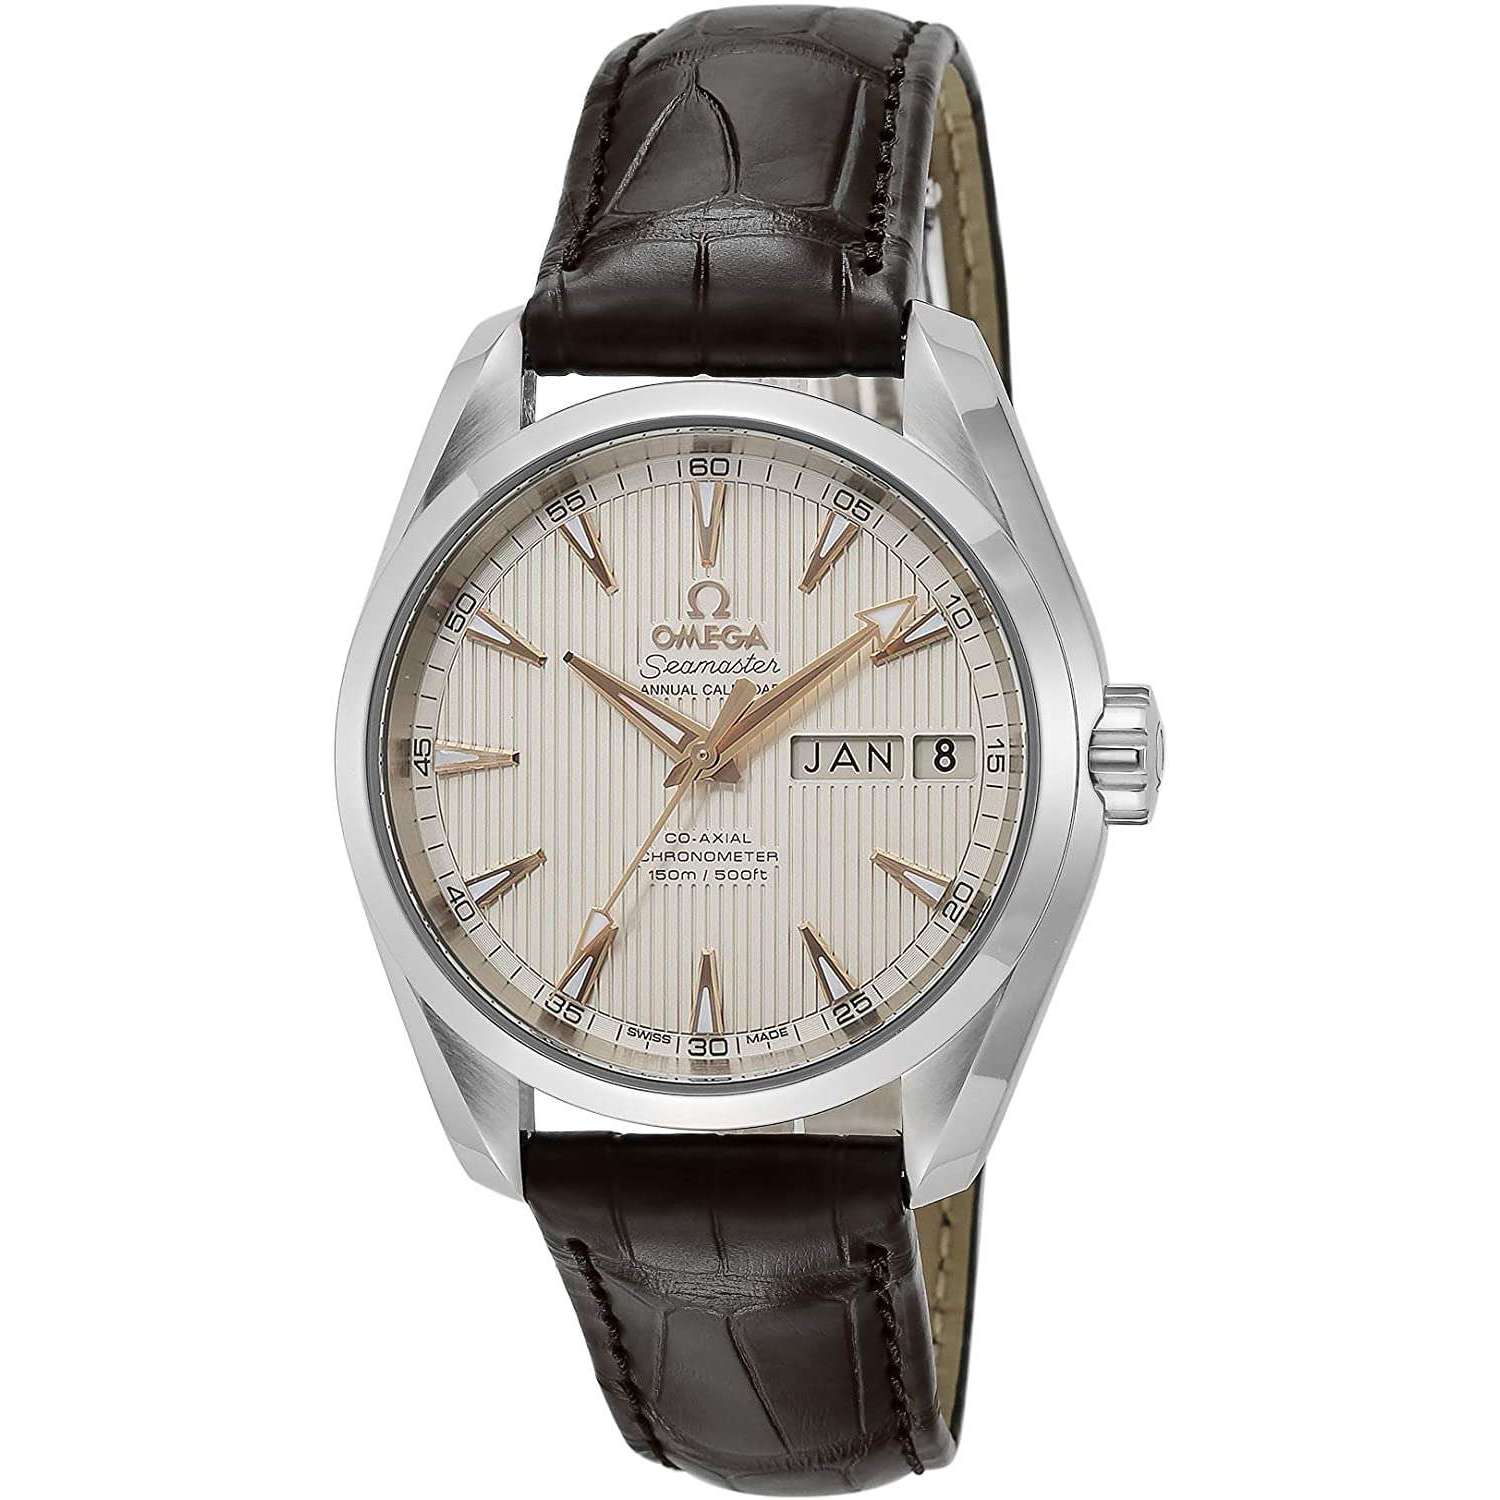 ROOK JAPAN:OMEGA SEAMASTER ANNUAL CALENDAR CO-AXIAL CHRONOMETER 39 MM MEN WATCH 231.13.39.22.02.001,Luxury Watch,Omega